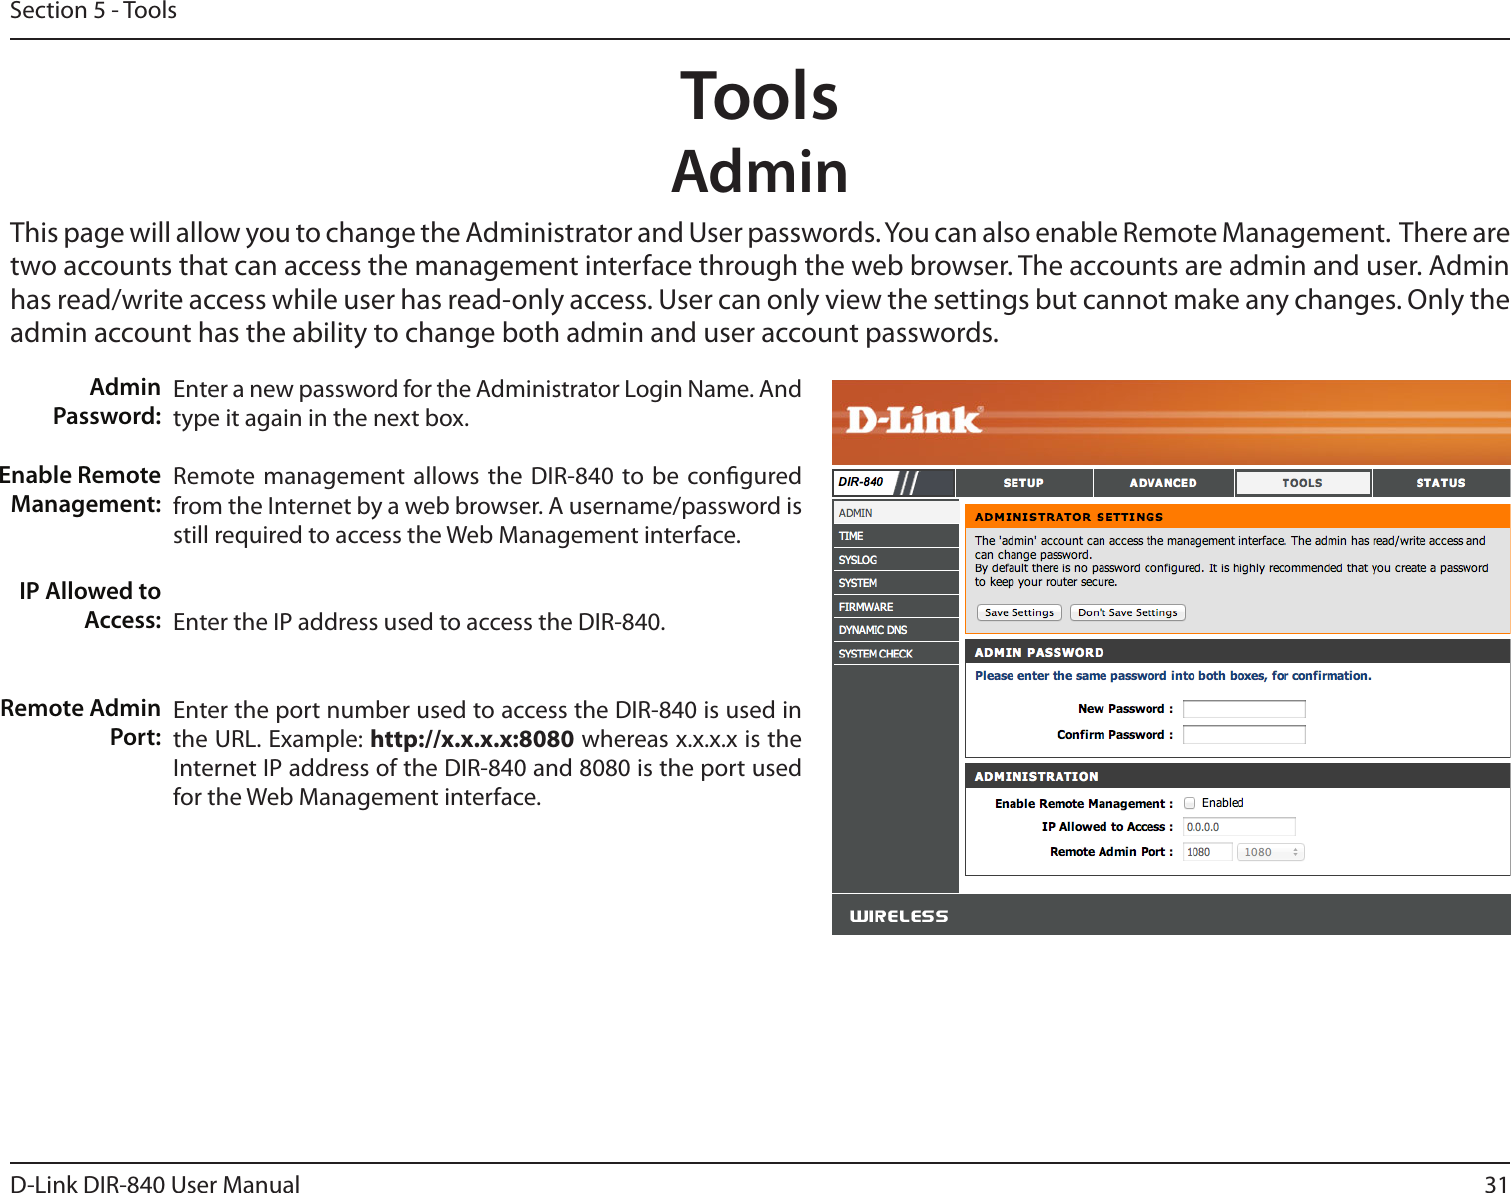 31D-Link DIR-840 User ManualSection 5 - ToolsAdminThis page will allow you to change the Administrator and User passwords. You can also enable Remote Management.  There are two accounts that can access the management interface through the web browser. The accounts are admin and user. Admin has read/write access while user has read-only access. User can only view the settings but cannot make any changes. Only the admin account has the ability to change both admin and user account passwords.ToolsEnter a new password for the Administrator Login Name. And type it again in the next box.Remote management allows the DIR-840 to be congured from the Internet by a web browser. A username/password is still required to access the Web Management interface. Enter the IP address used to access the DIR-840.Enter the port number used to access the DIR-840 is used in the URL. Example: http://x.x.x.x:8080 whereas x.x.x.x is the Internet IP address of the DIR-840 and 8080 is the port used for the Web Management interface.Admin Password:Enable Remote Management:IP Allowed to Access:Remote Admin Port: